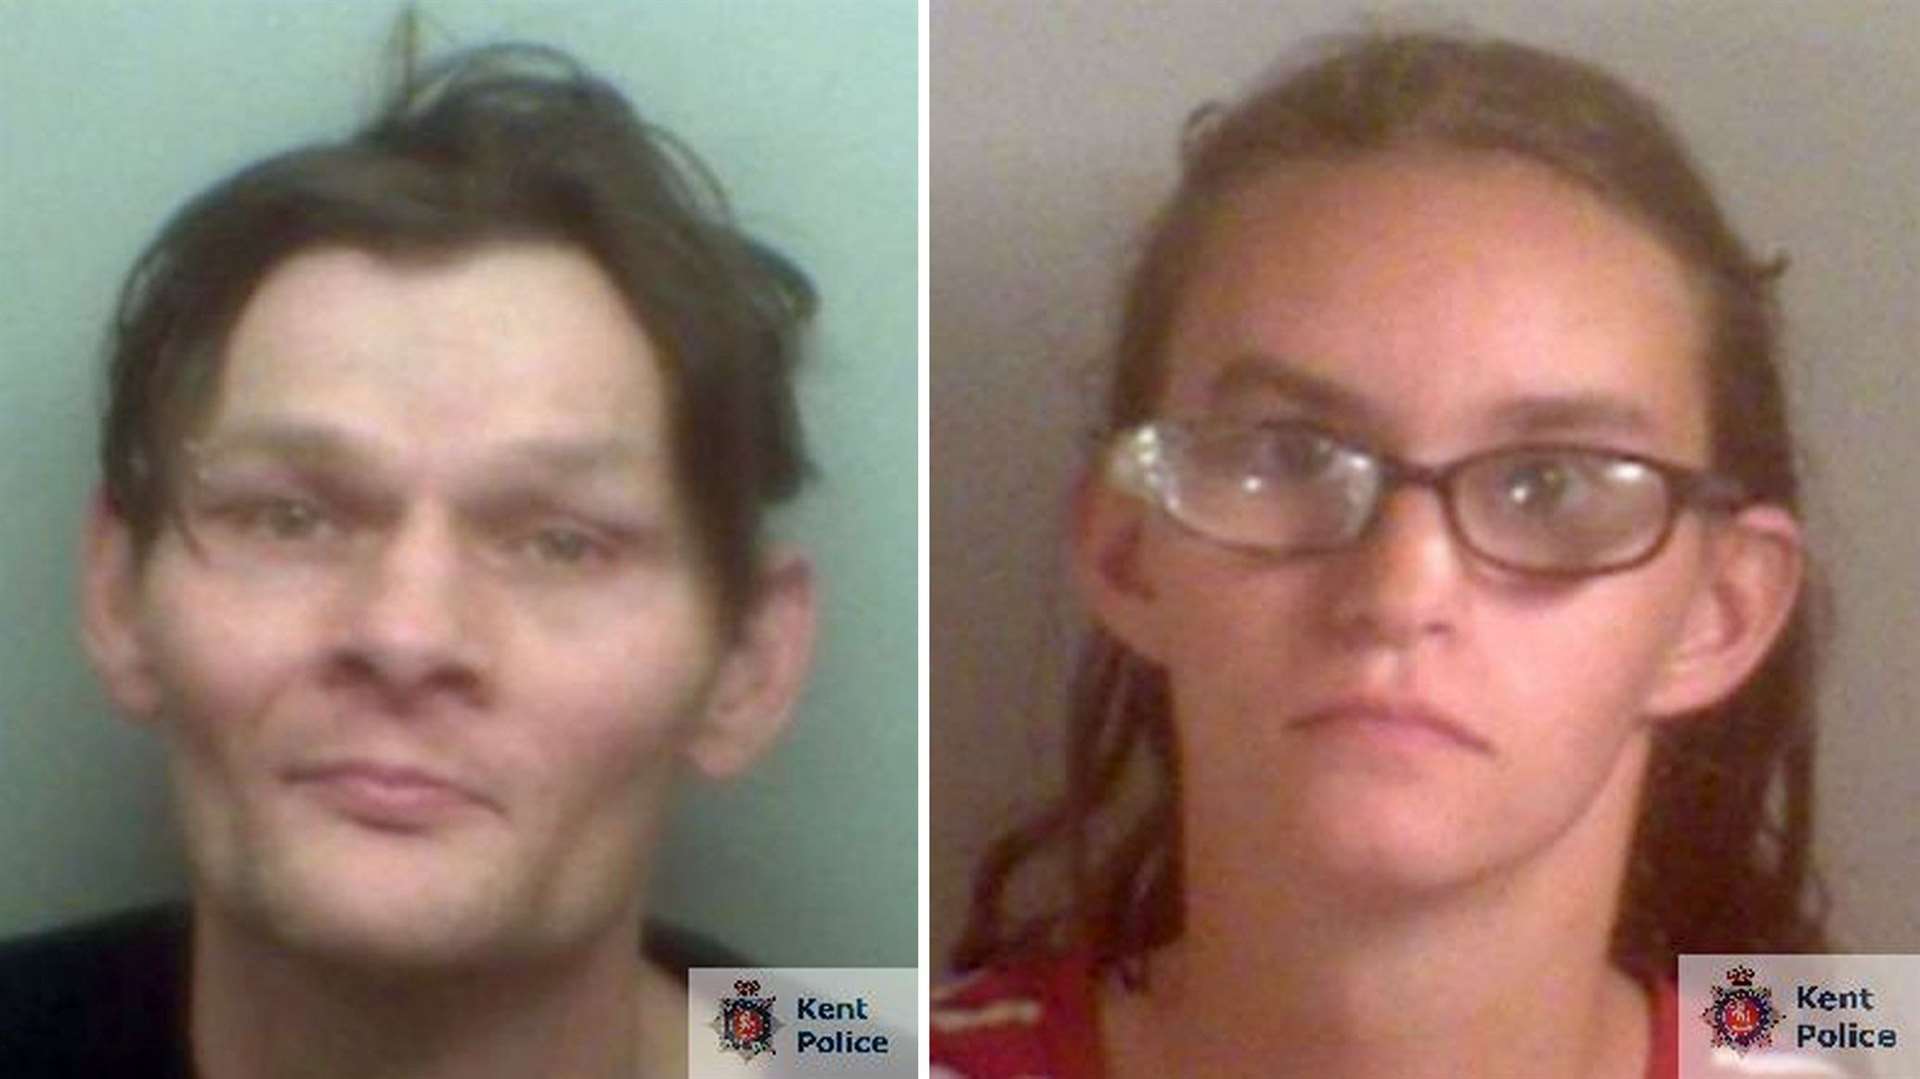 Tony’s birth parents Antony Smith and Jody Simpson were jailed for the abuse they inflicted on him as a baby (Kent Police/PA)